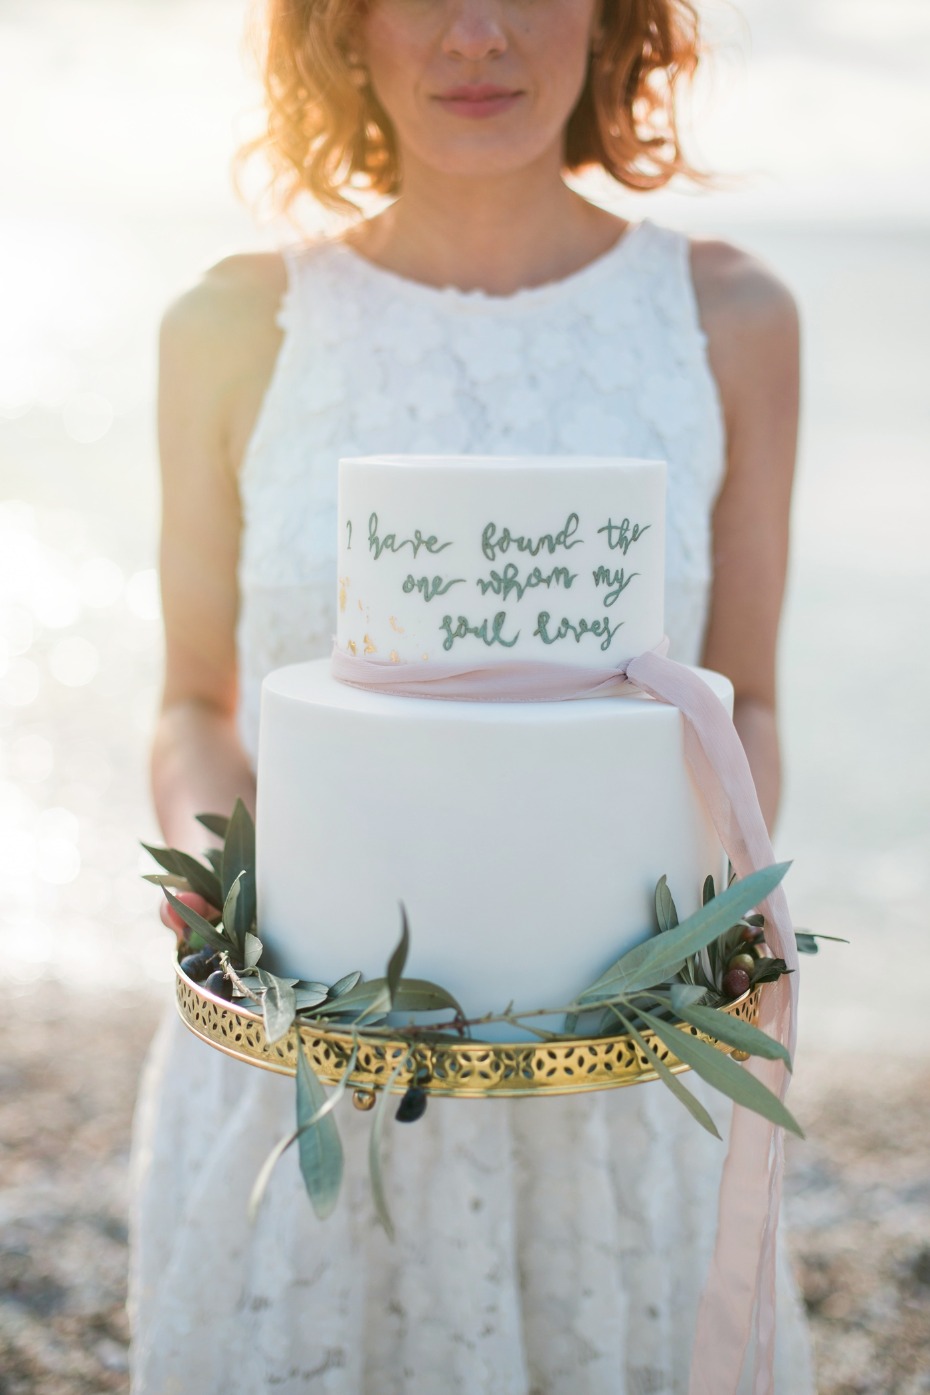 White wedding cake with love quote